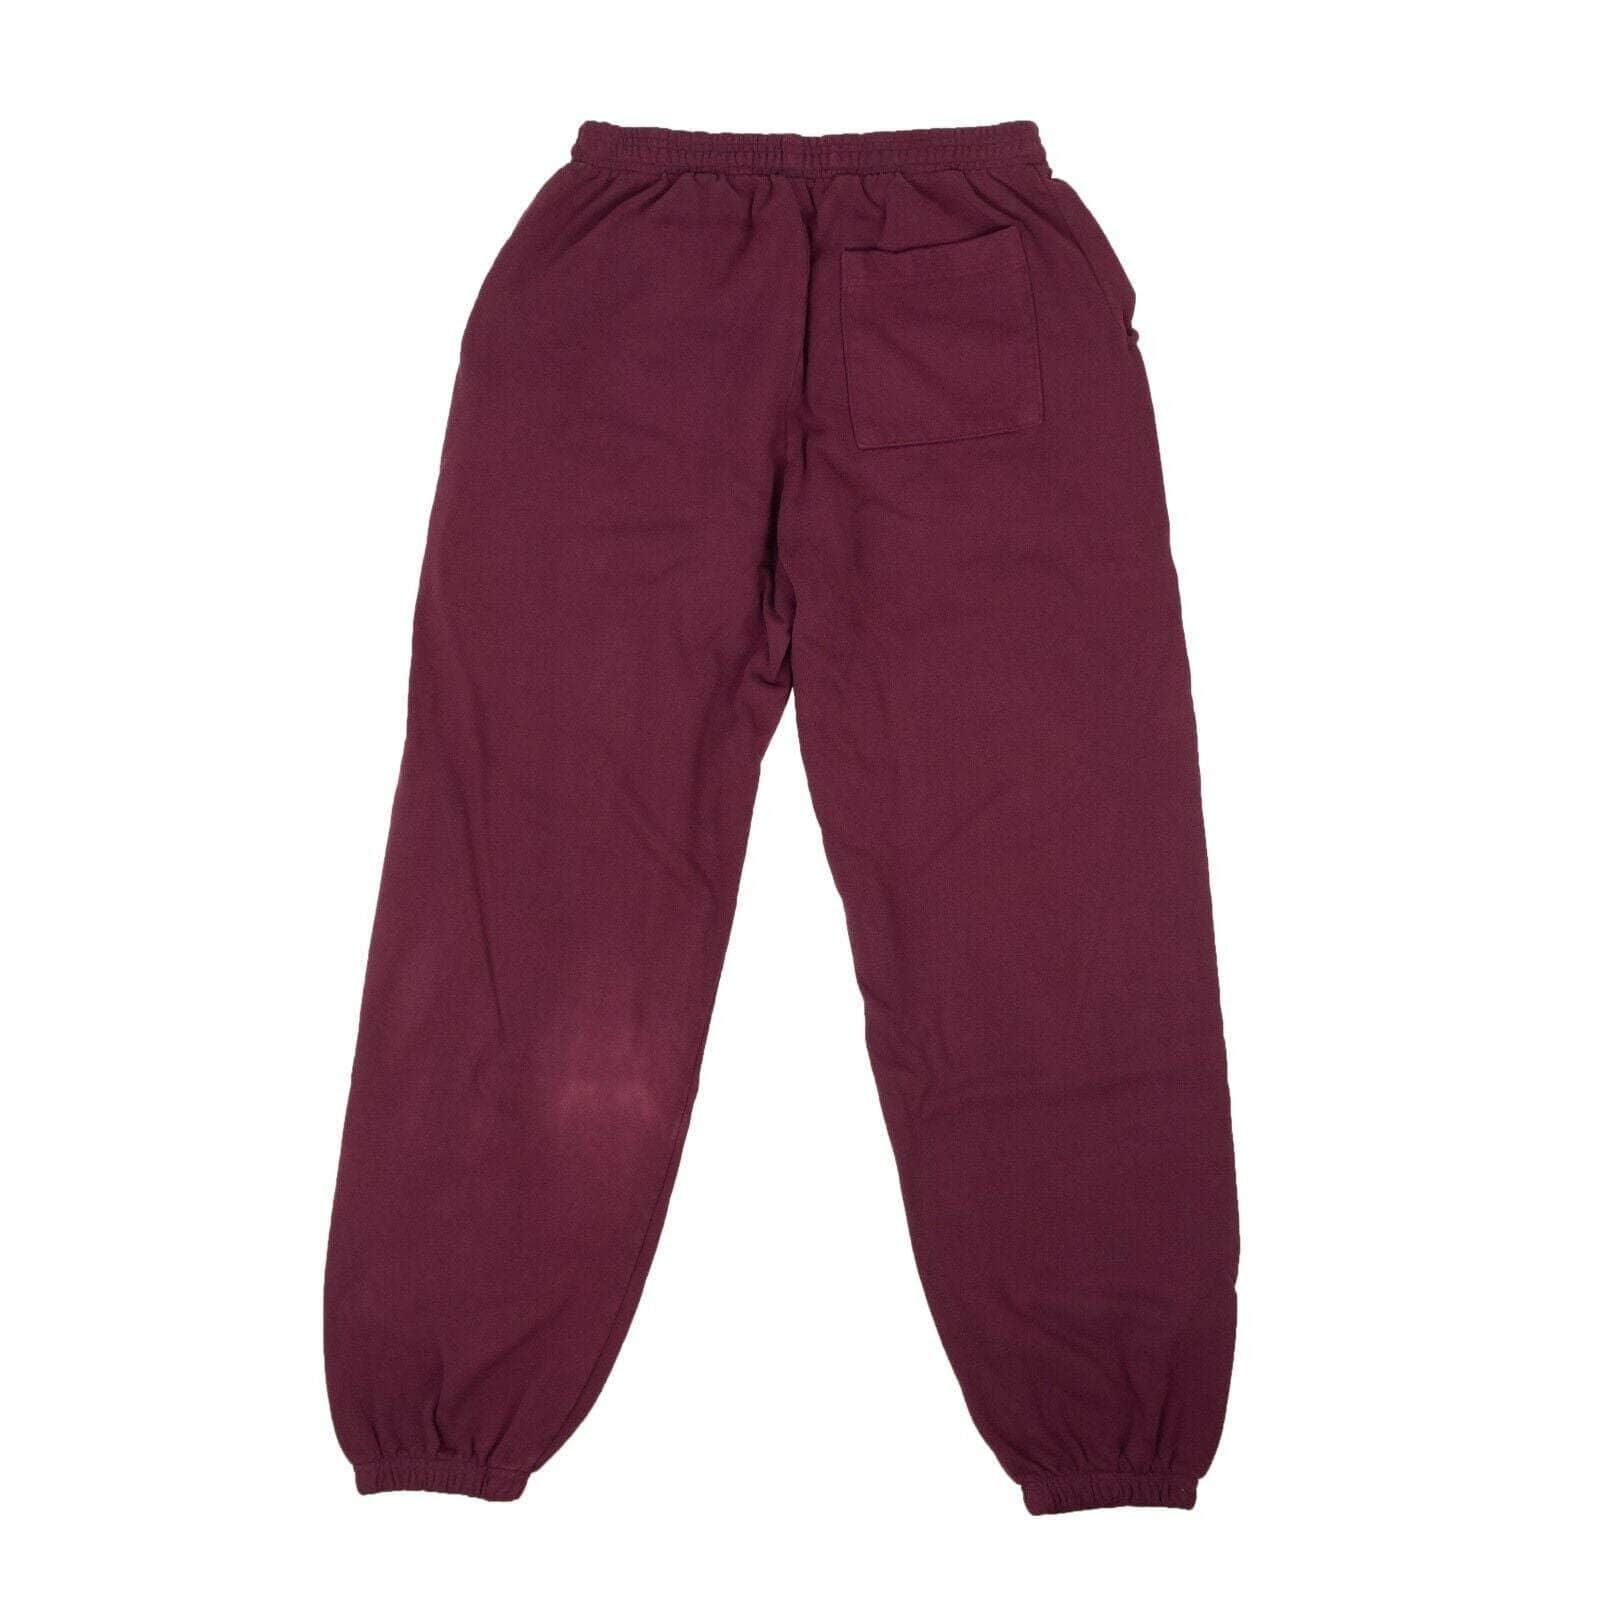 SP5DER channelenable-all, chicmi, couponcollection, gender-mens, main-clothing, mens-joggers-sweatpants, mens-shoes, shop375, Stadium Goods, under-250 Nocturnal Highway Sweatpant